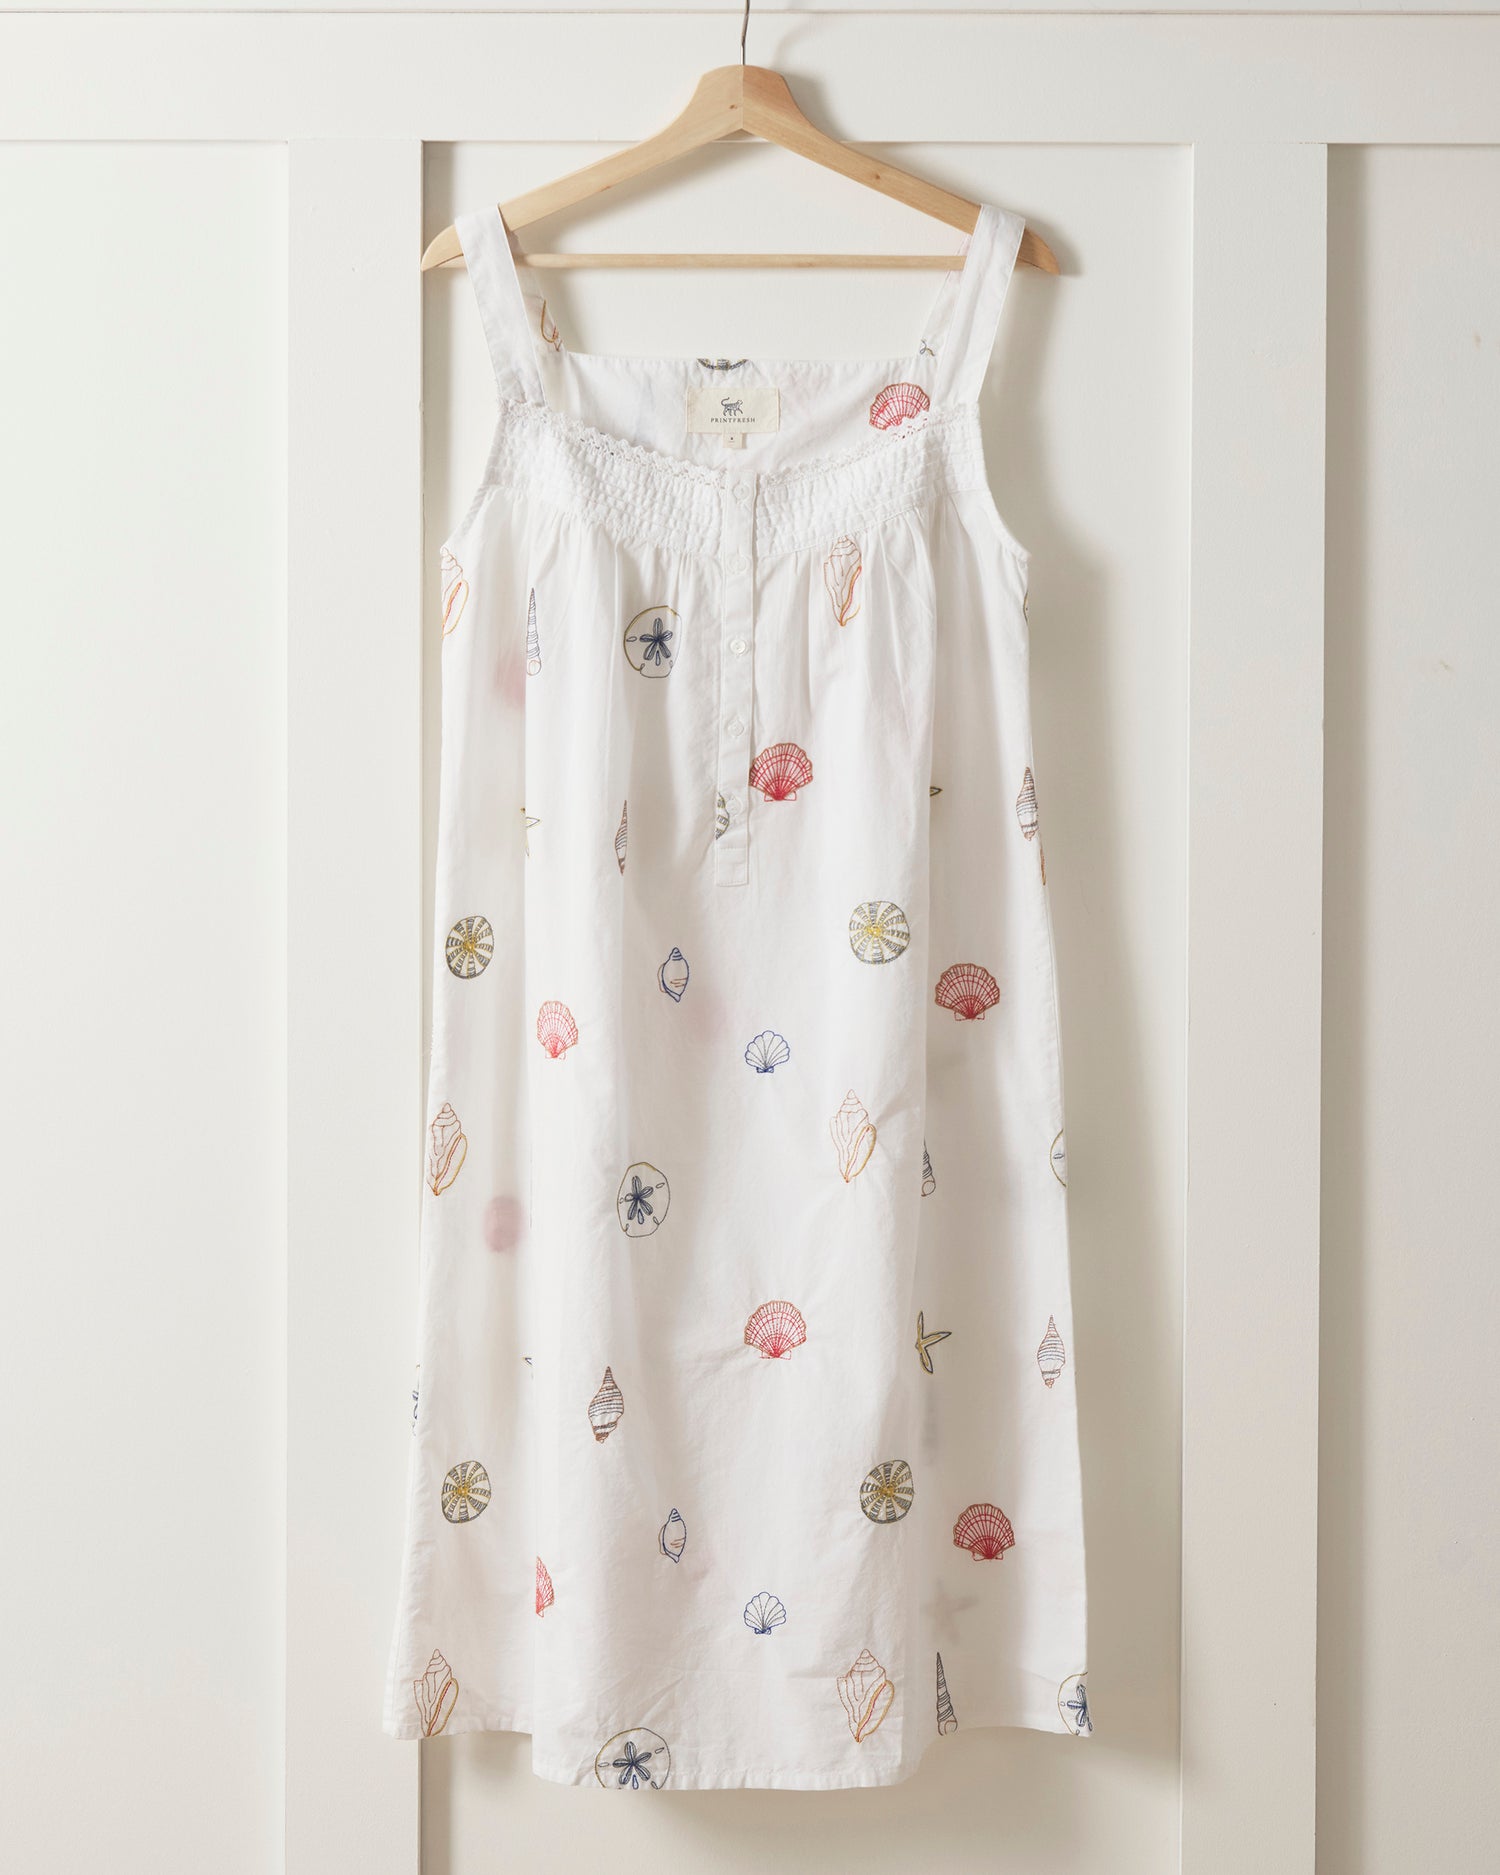 Embroidered Shells - Back to Bed Nightgown - Sand - Printfresh